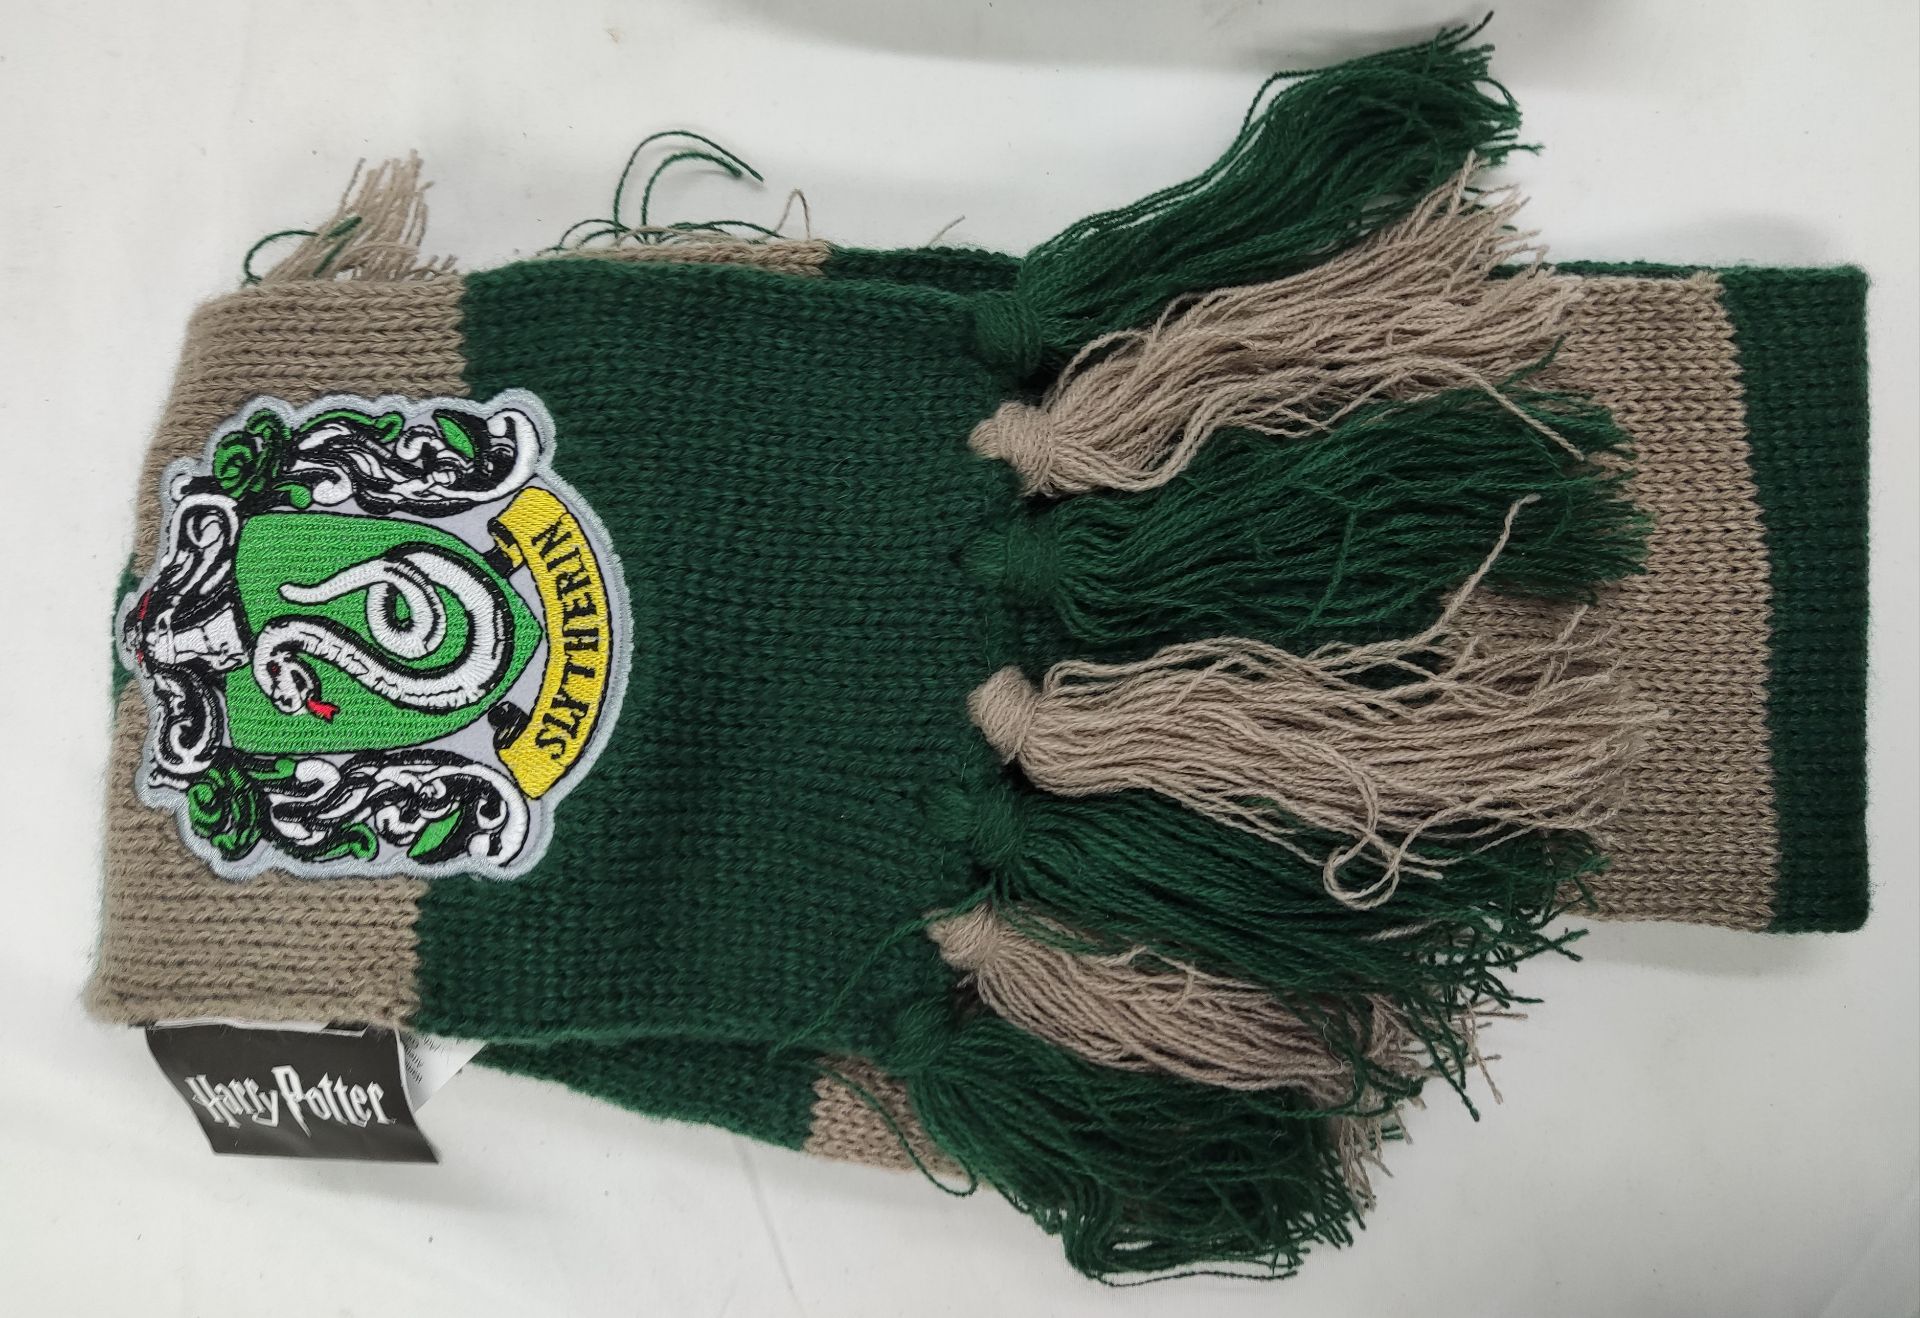 1 x HARRY POTTER Slytherin Scarf And Hedwig Drinks Bottle - Original RRP £40.00 - Image 2 of 6